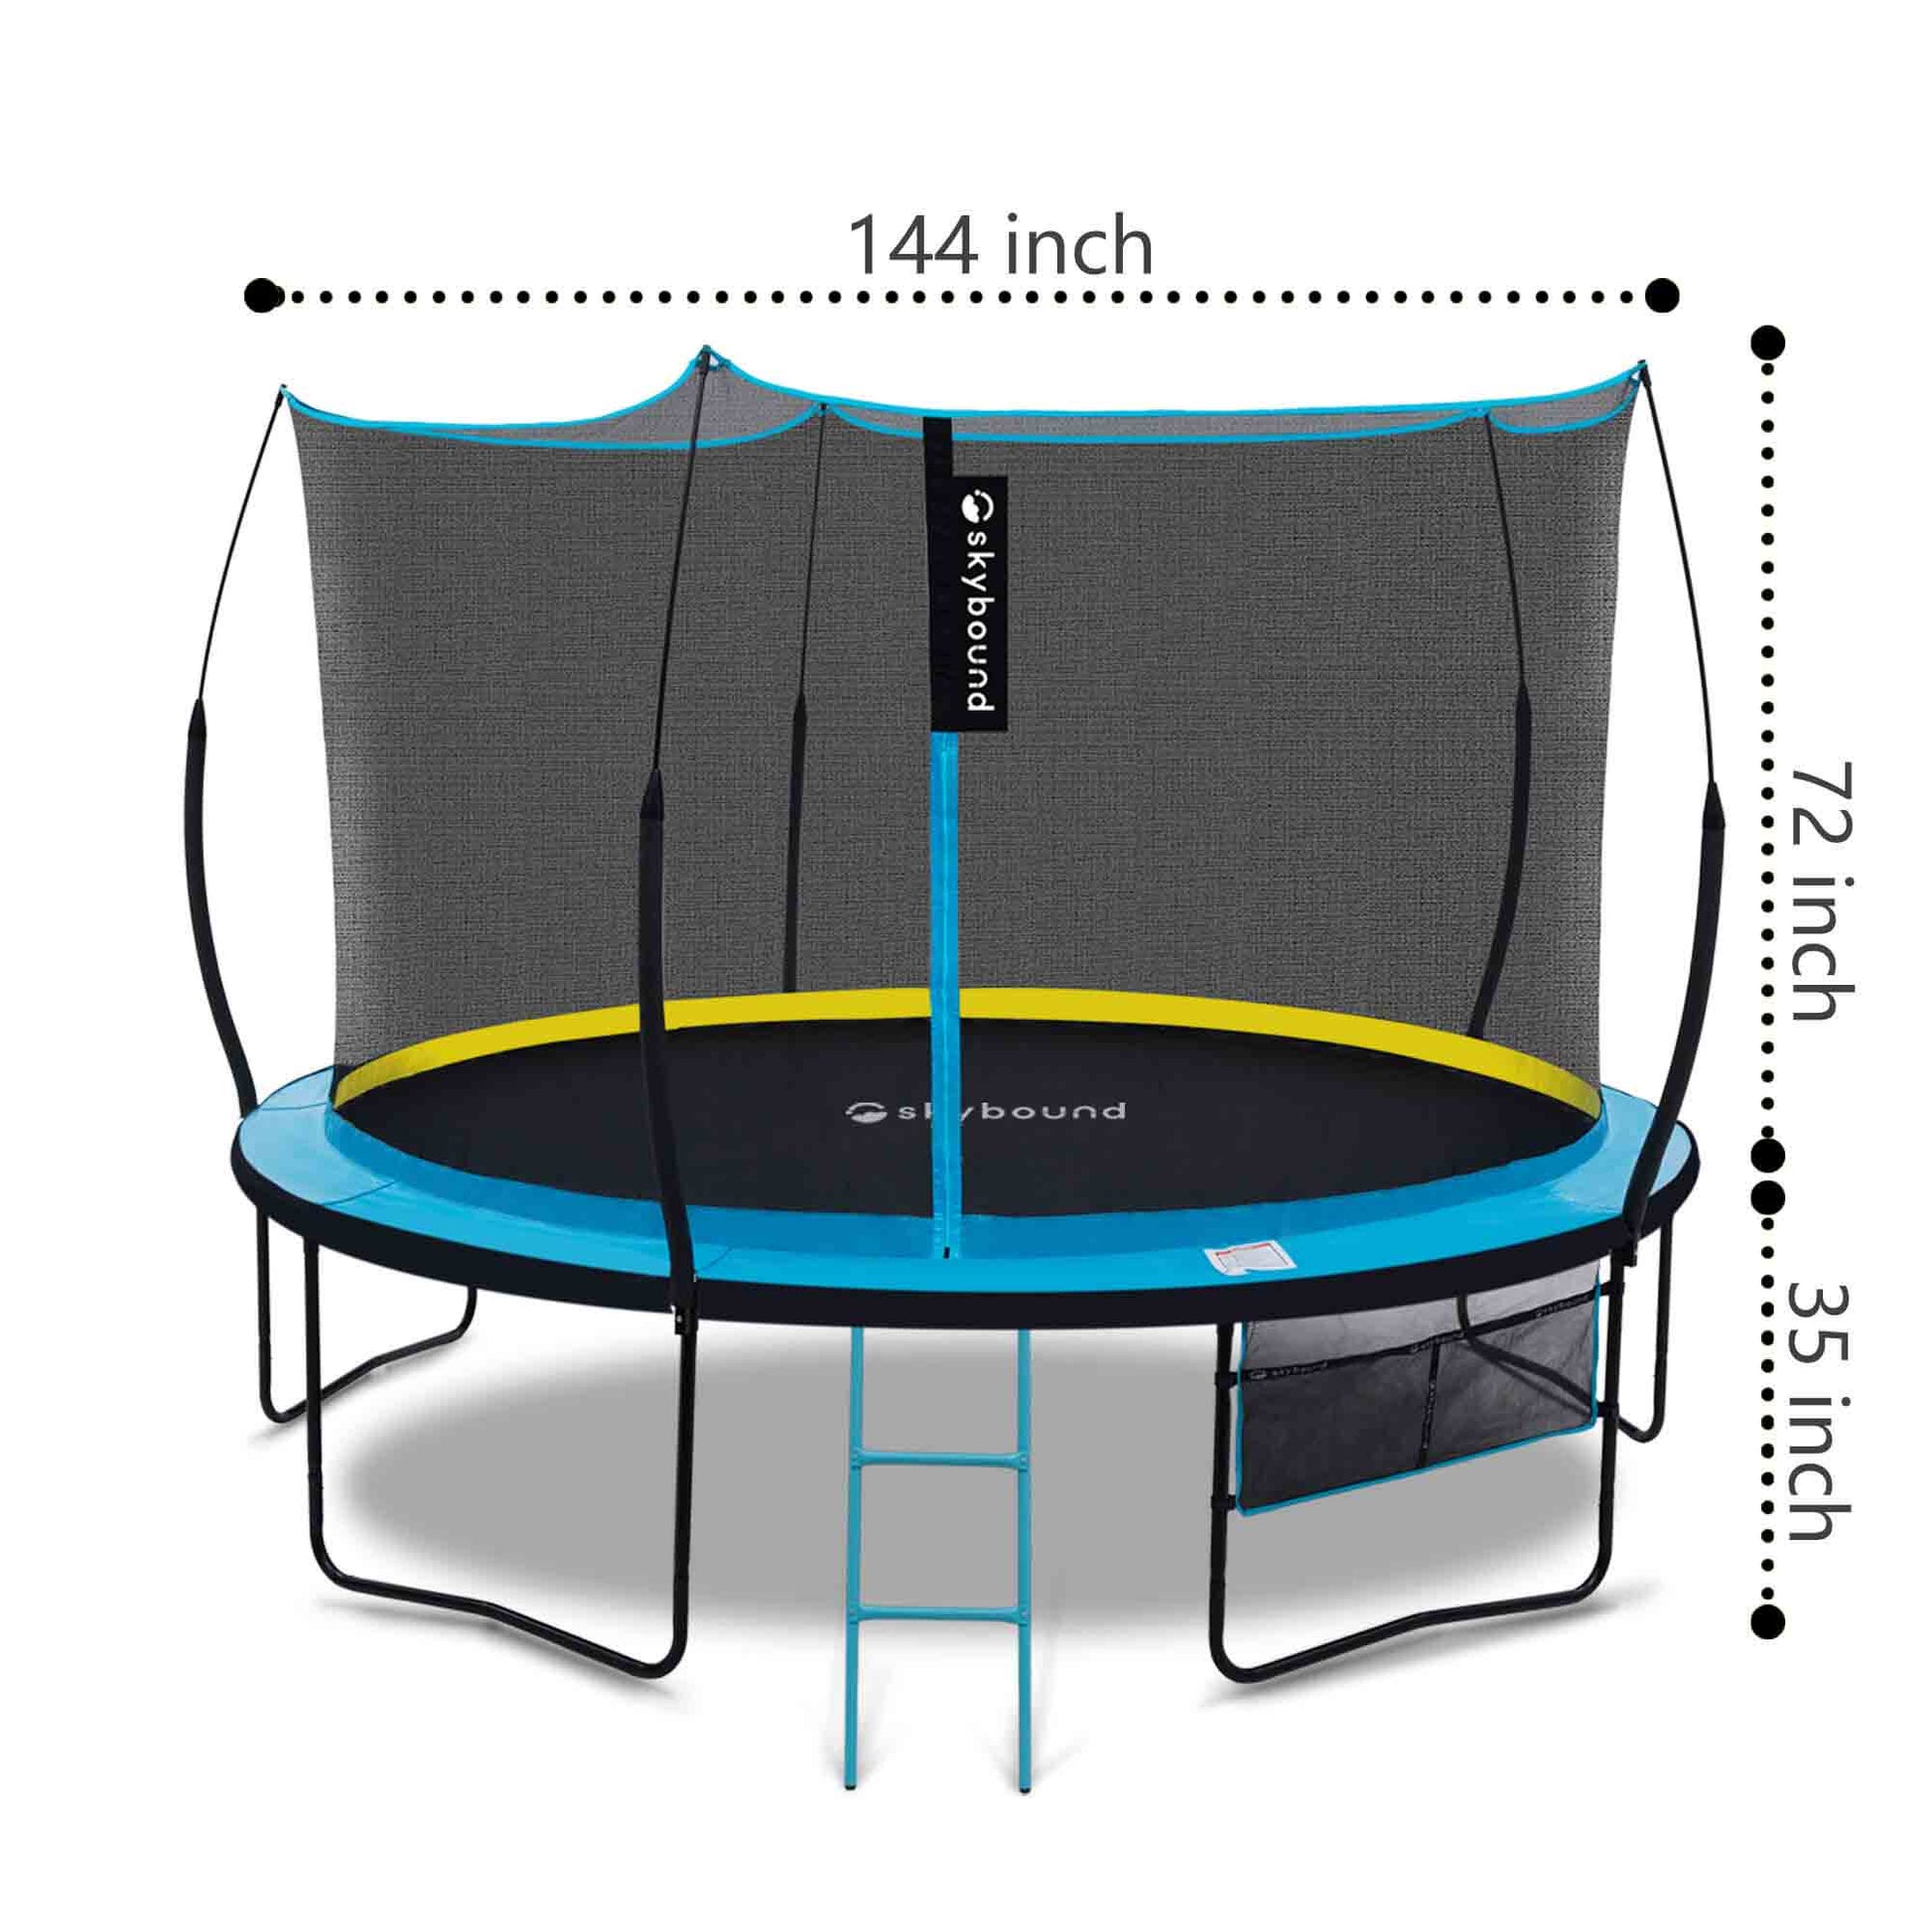 12 ft trampoline size: 144inch × 105inch